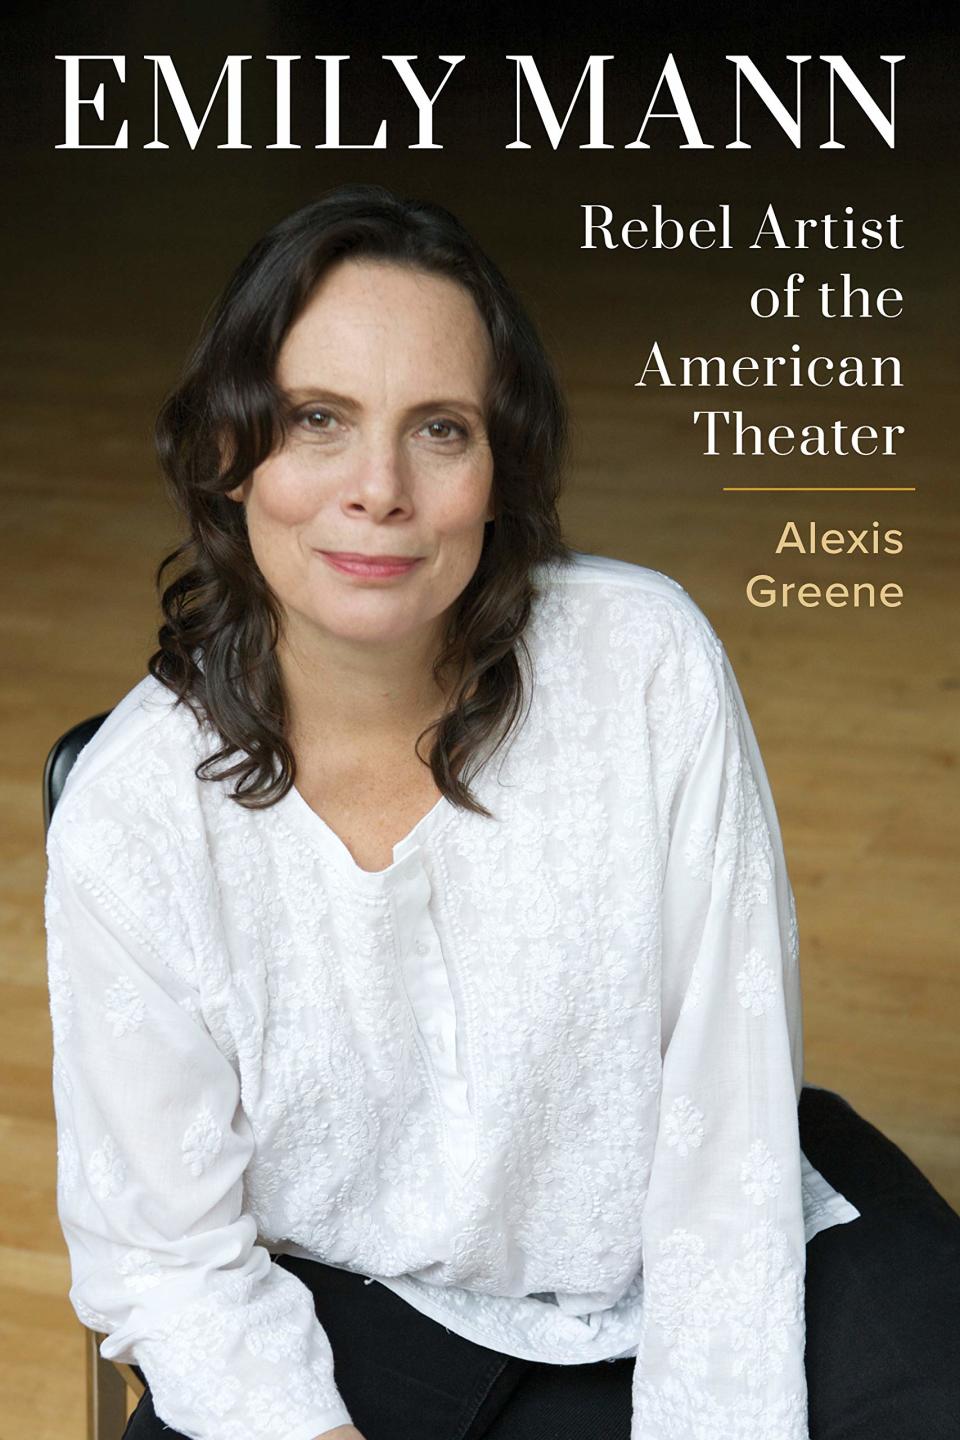 The cover image of Alexis Greene’s biography “Emily Mann: Rebel Artist of the American Theater.”